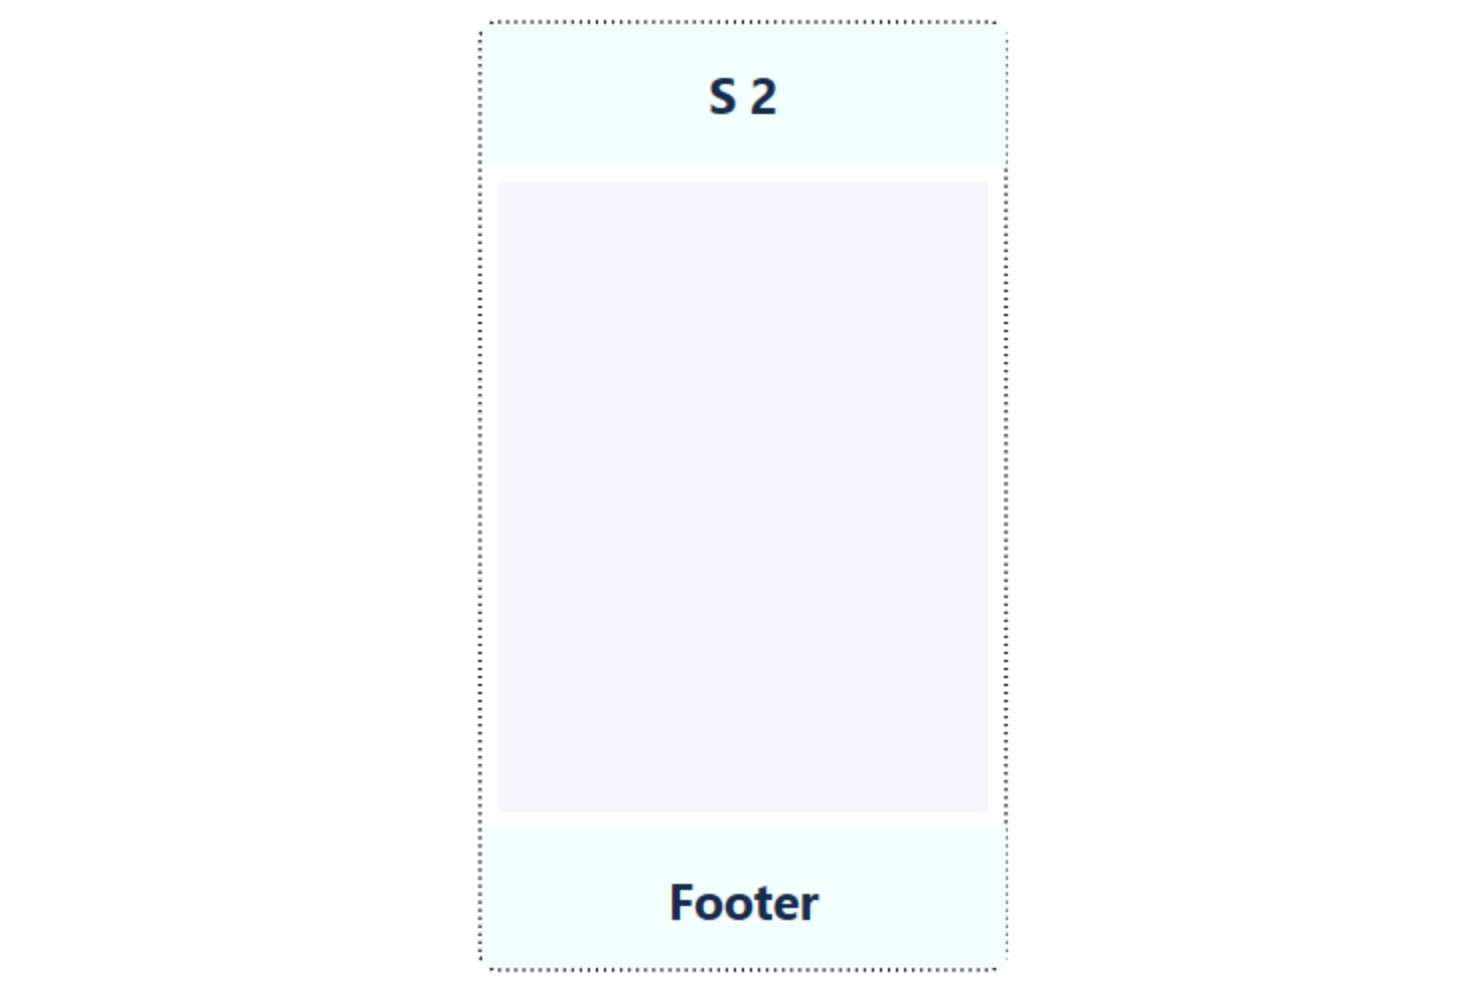 Flexbox footer pushed down